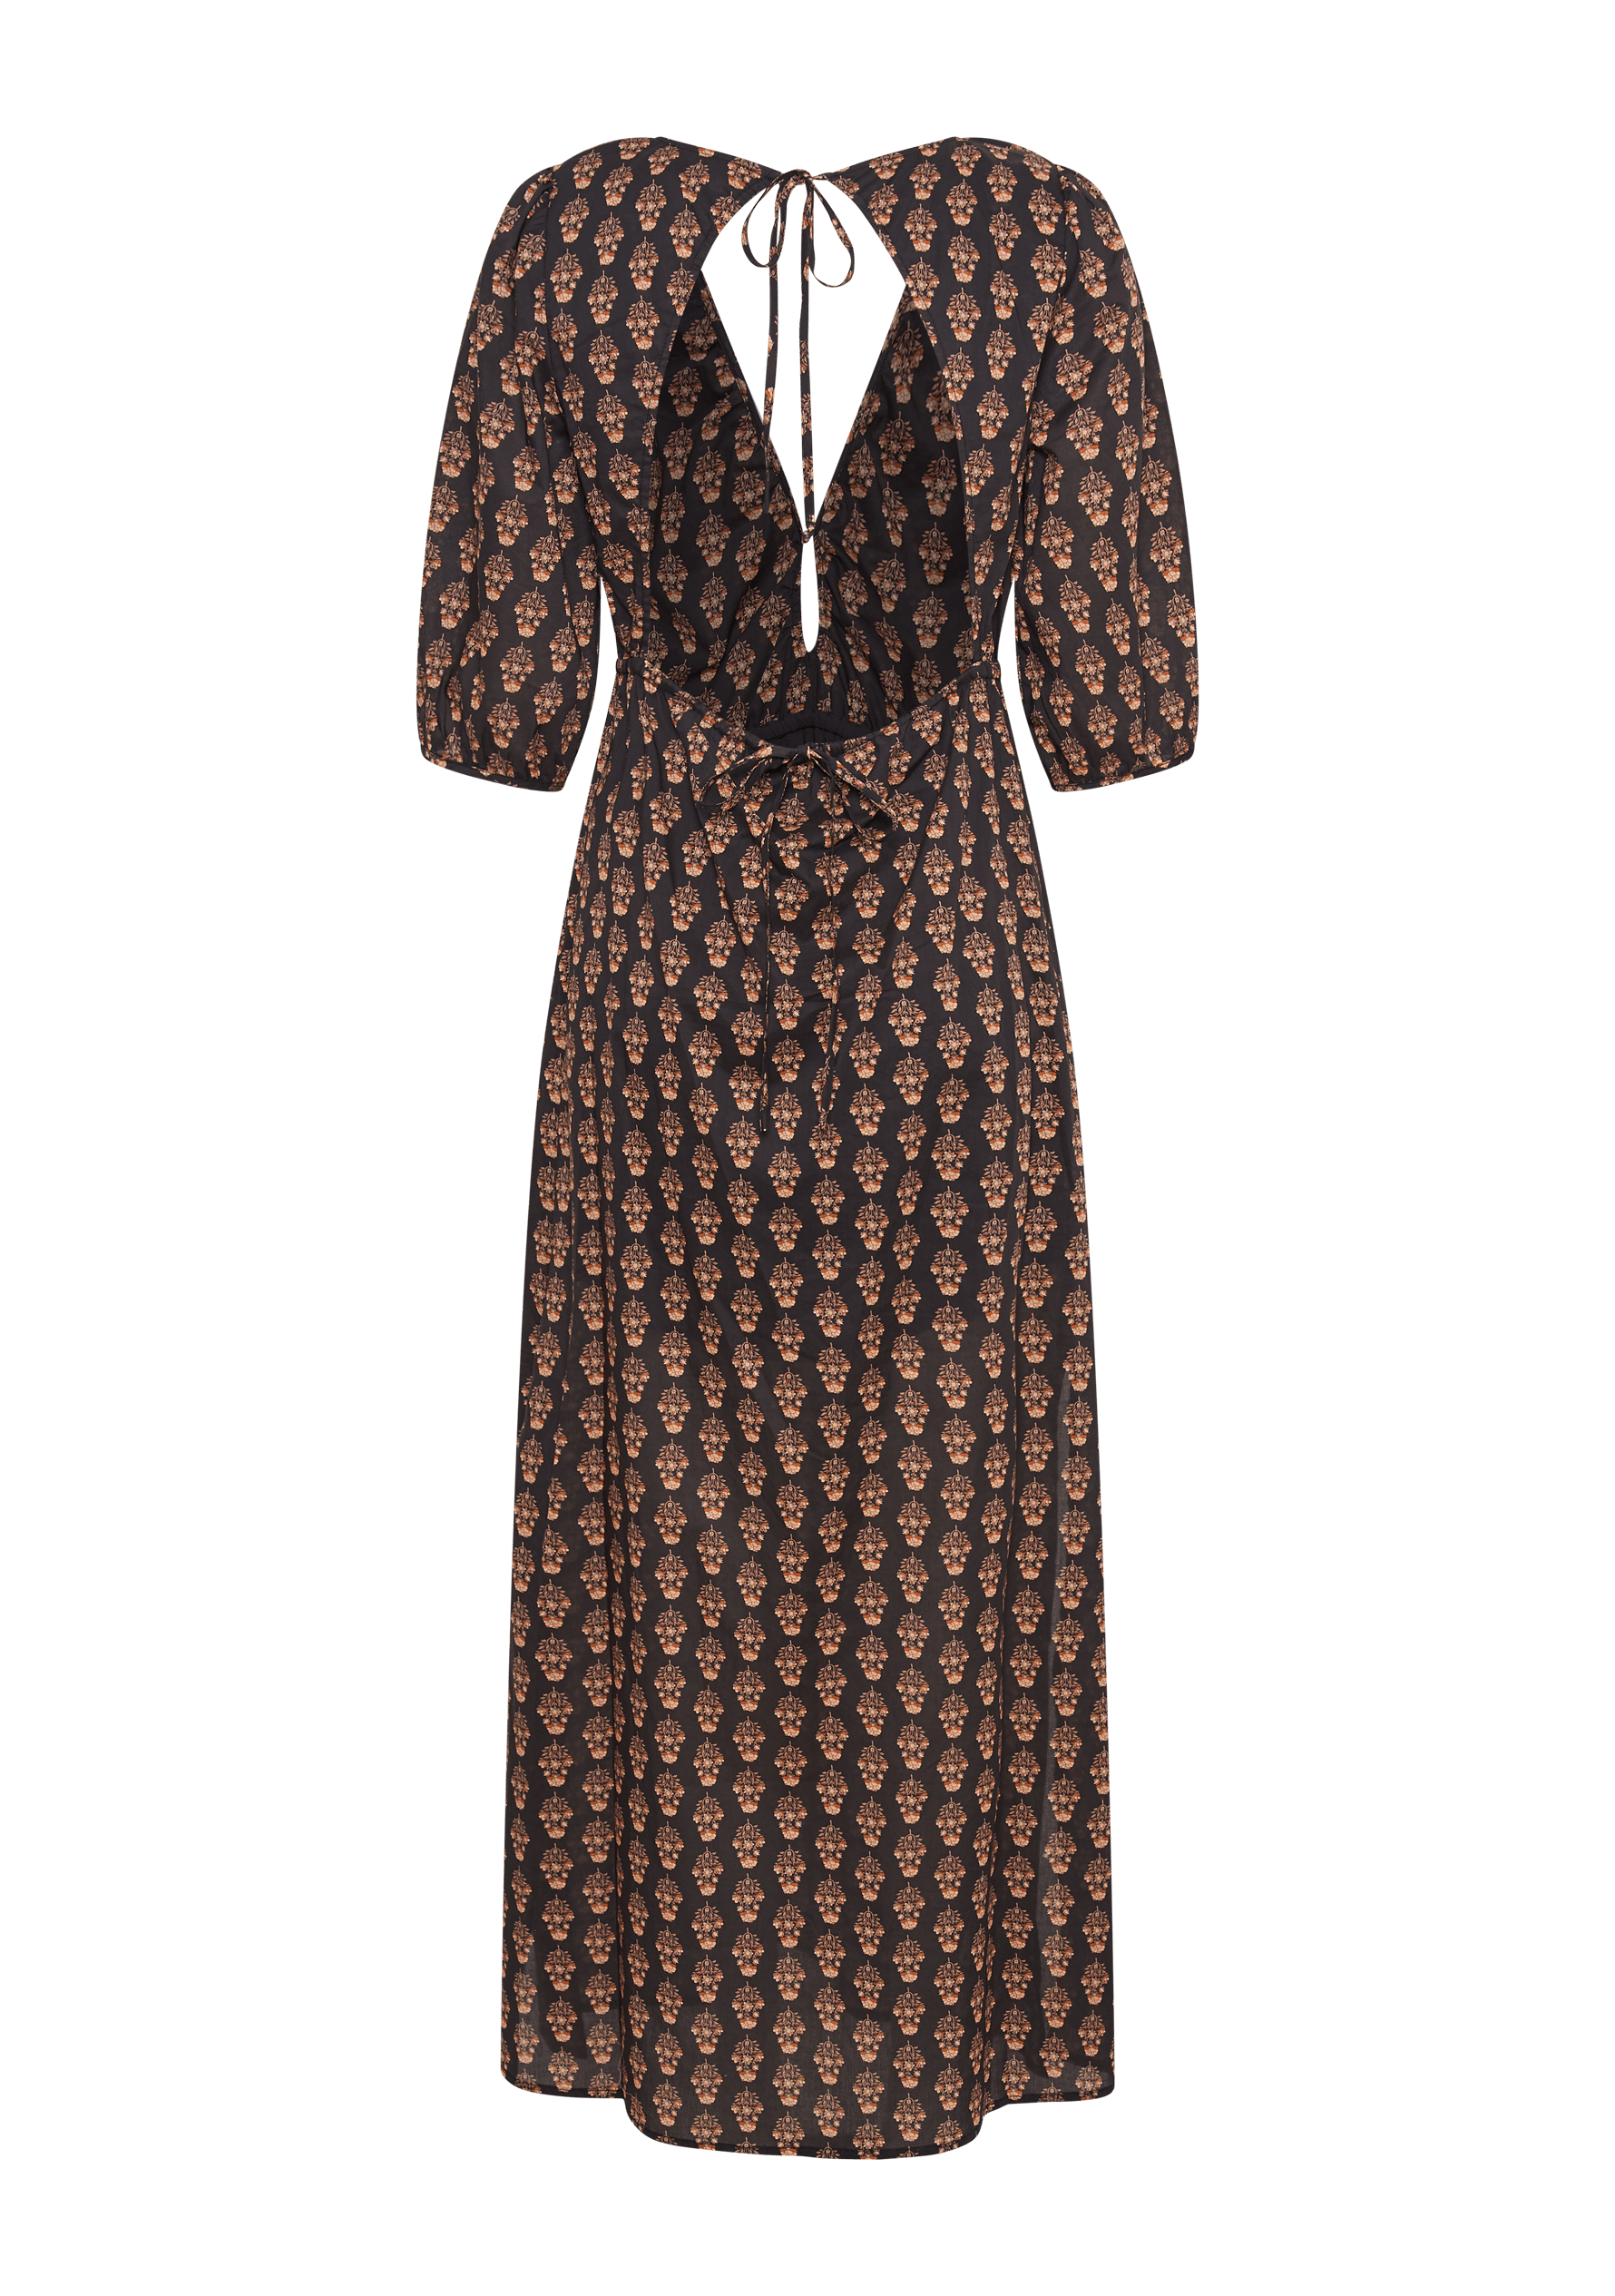 Ariah Lee Maxi Dress | Auguste The Label